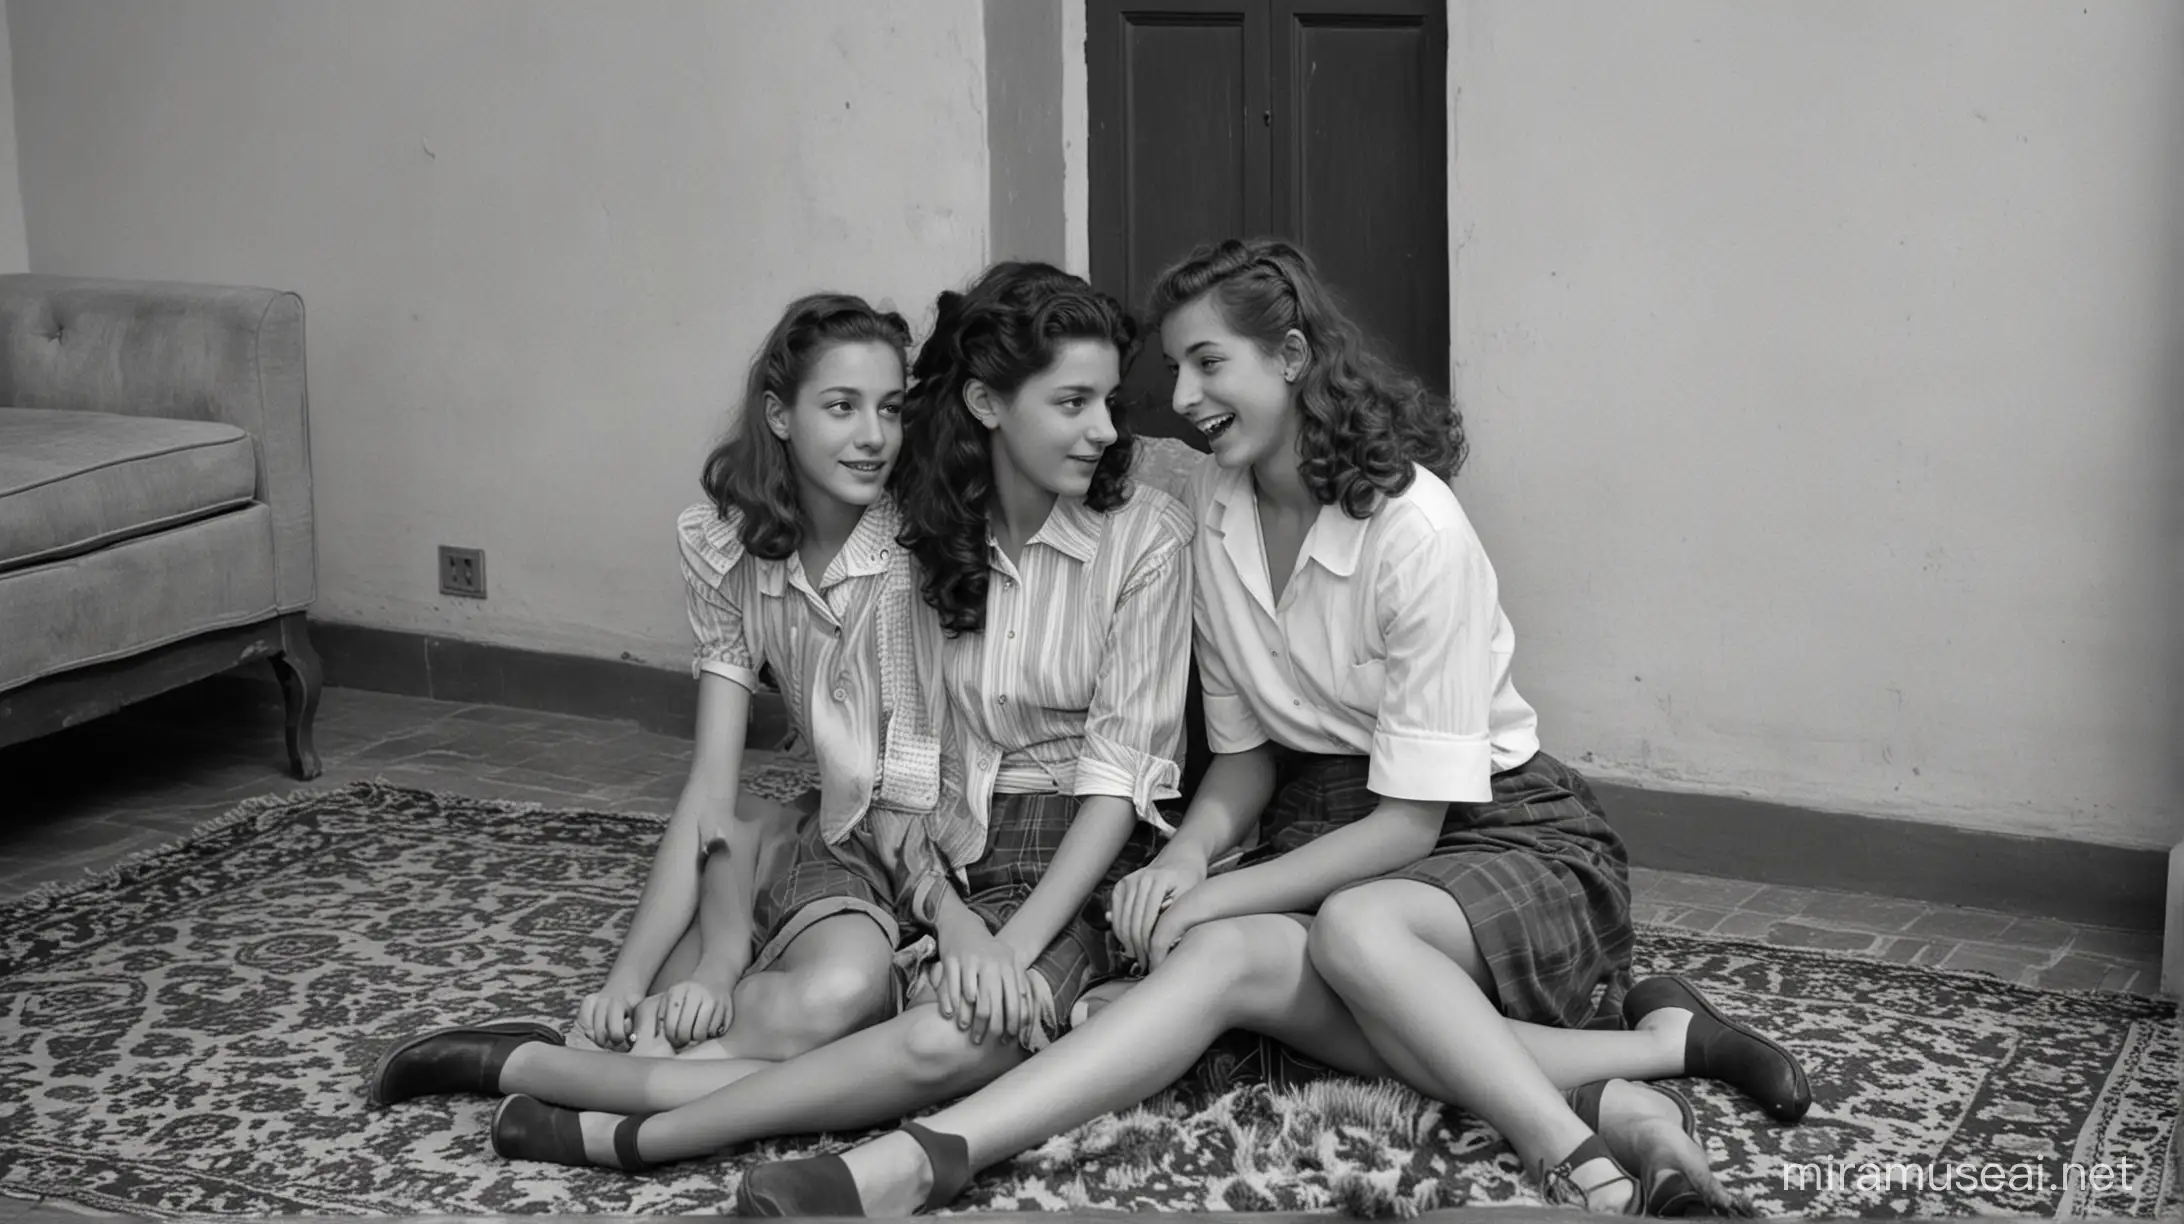 Italian Twin Sisters Chatting on Rug in 1945 Florence Apartment